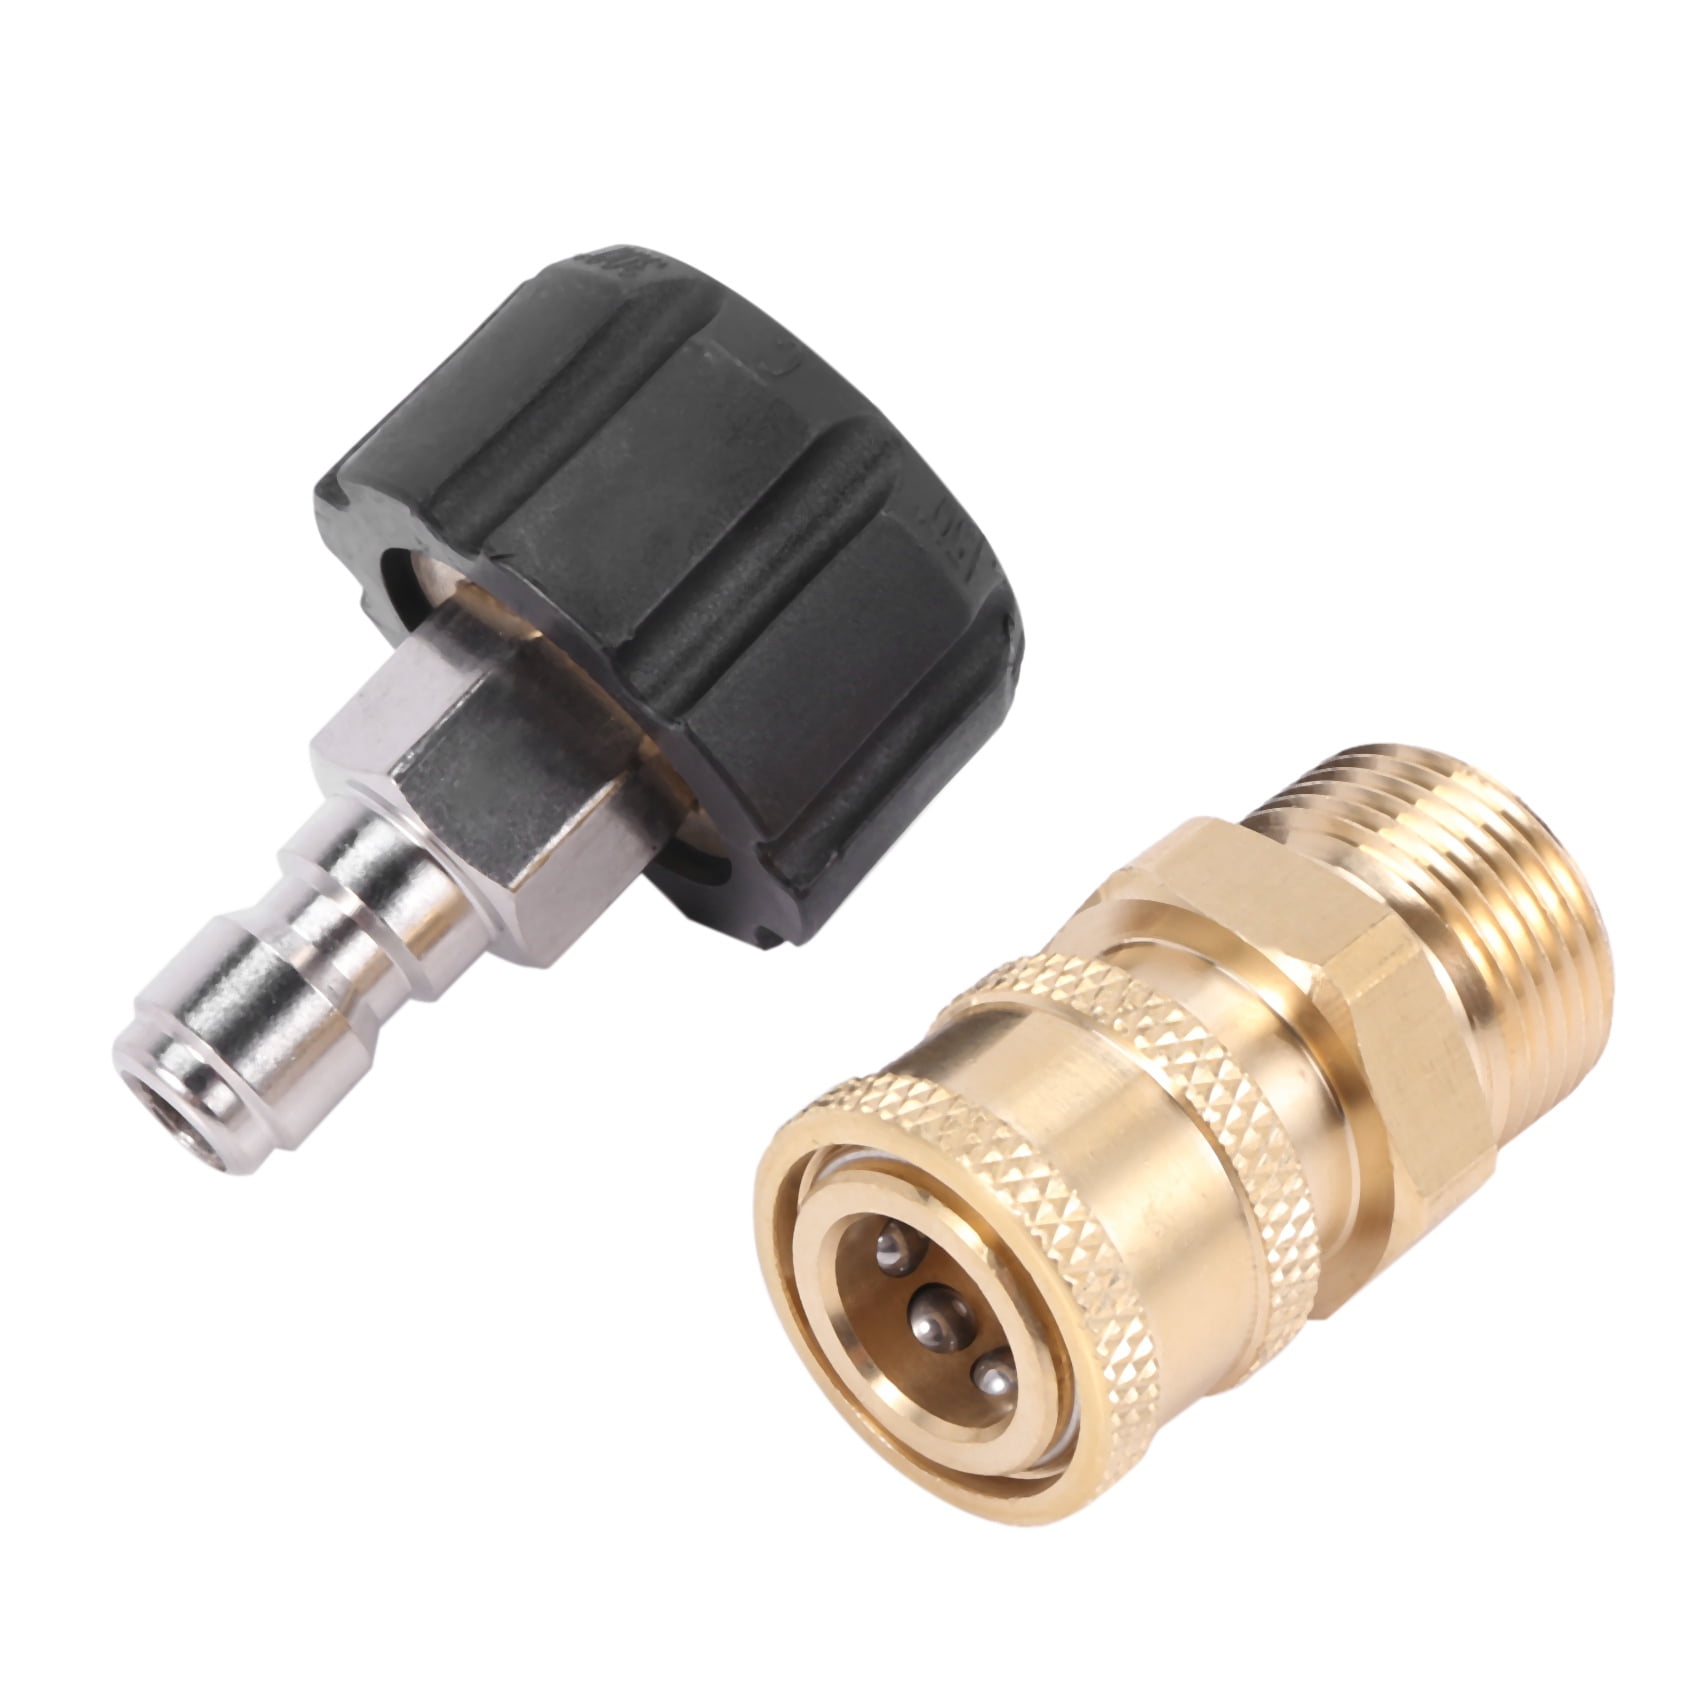 Pressure Washer Adapter Connector M22/14 to 1/4 Male Coupling M22 X 1/4 